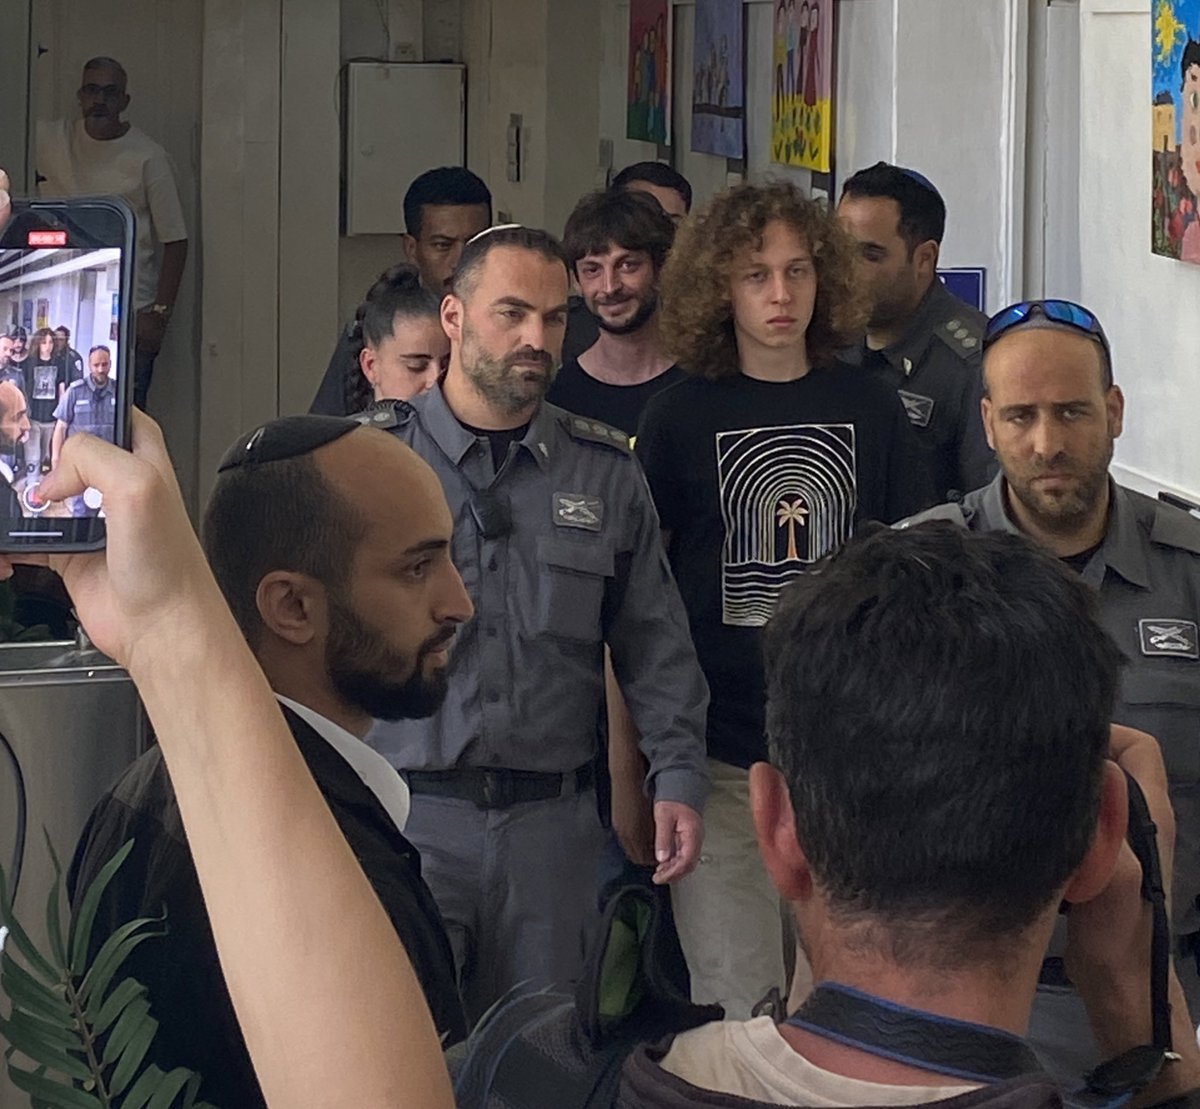 The kid with hair is my eldest son, Neta. Handcuffed (in the legs too - he is that dangerous). He got arrested yesterday in a protest for the hostages. Released now with no conditions. Well done, police. Well done 🙄